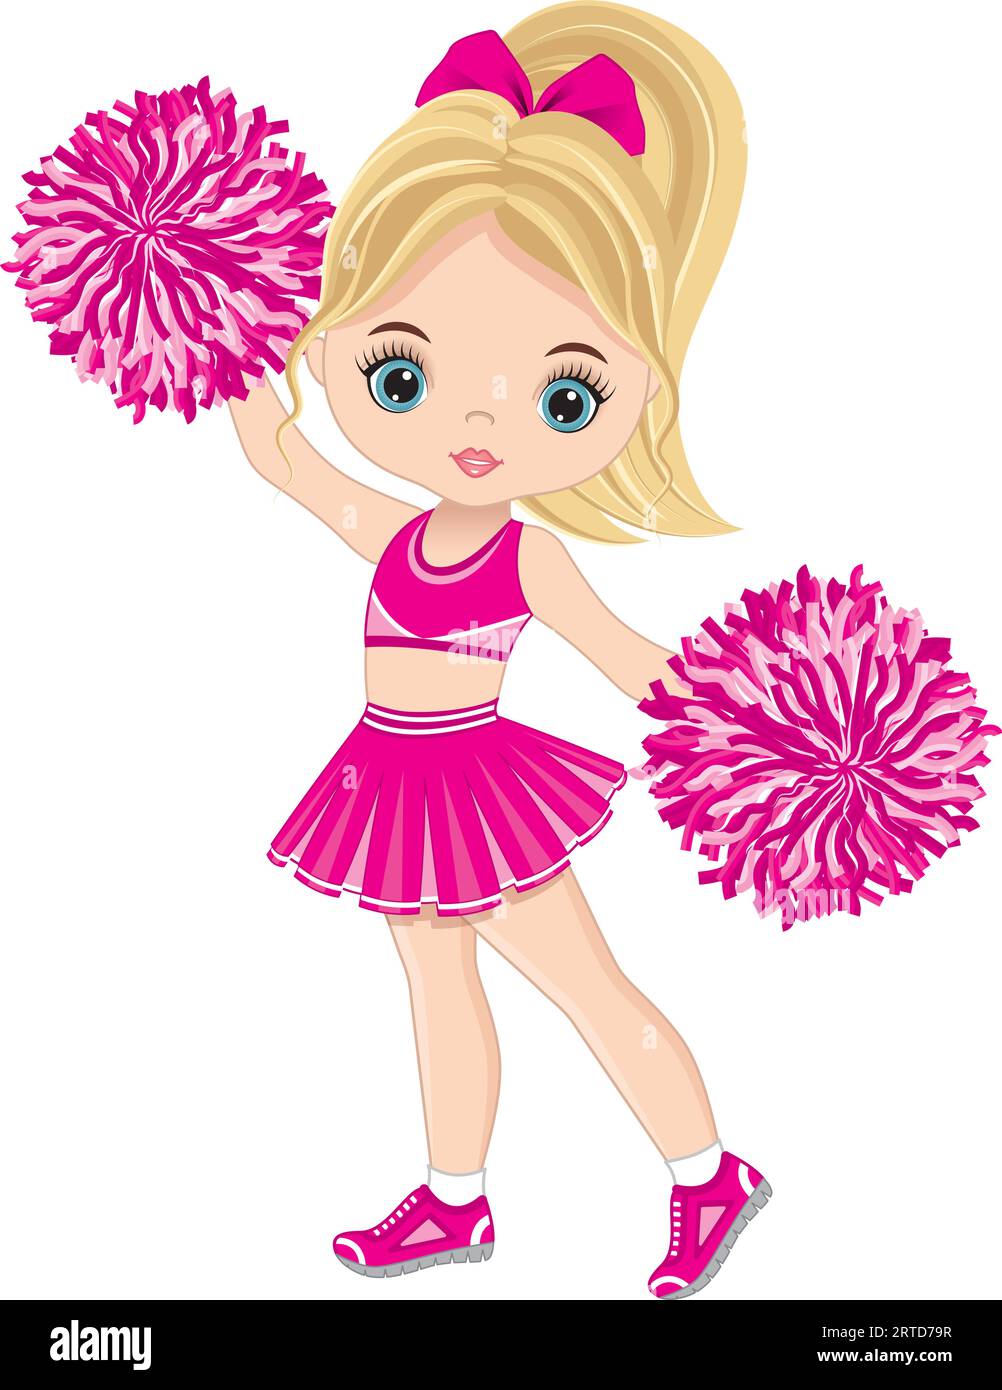 10,604 Pom Pom Girl Images, Stock Photos, 3D objects, & Vectors